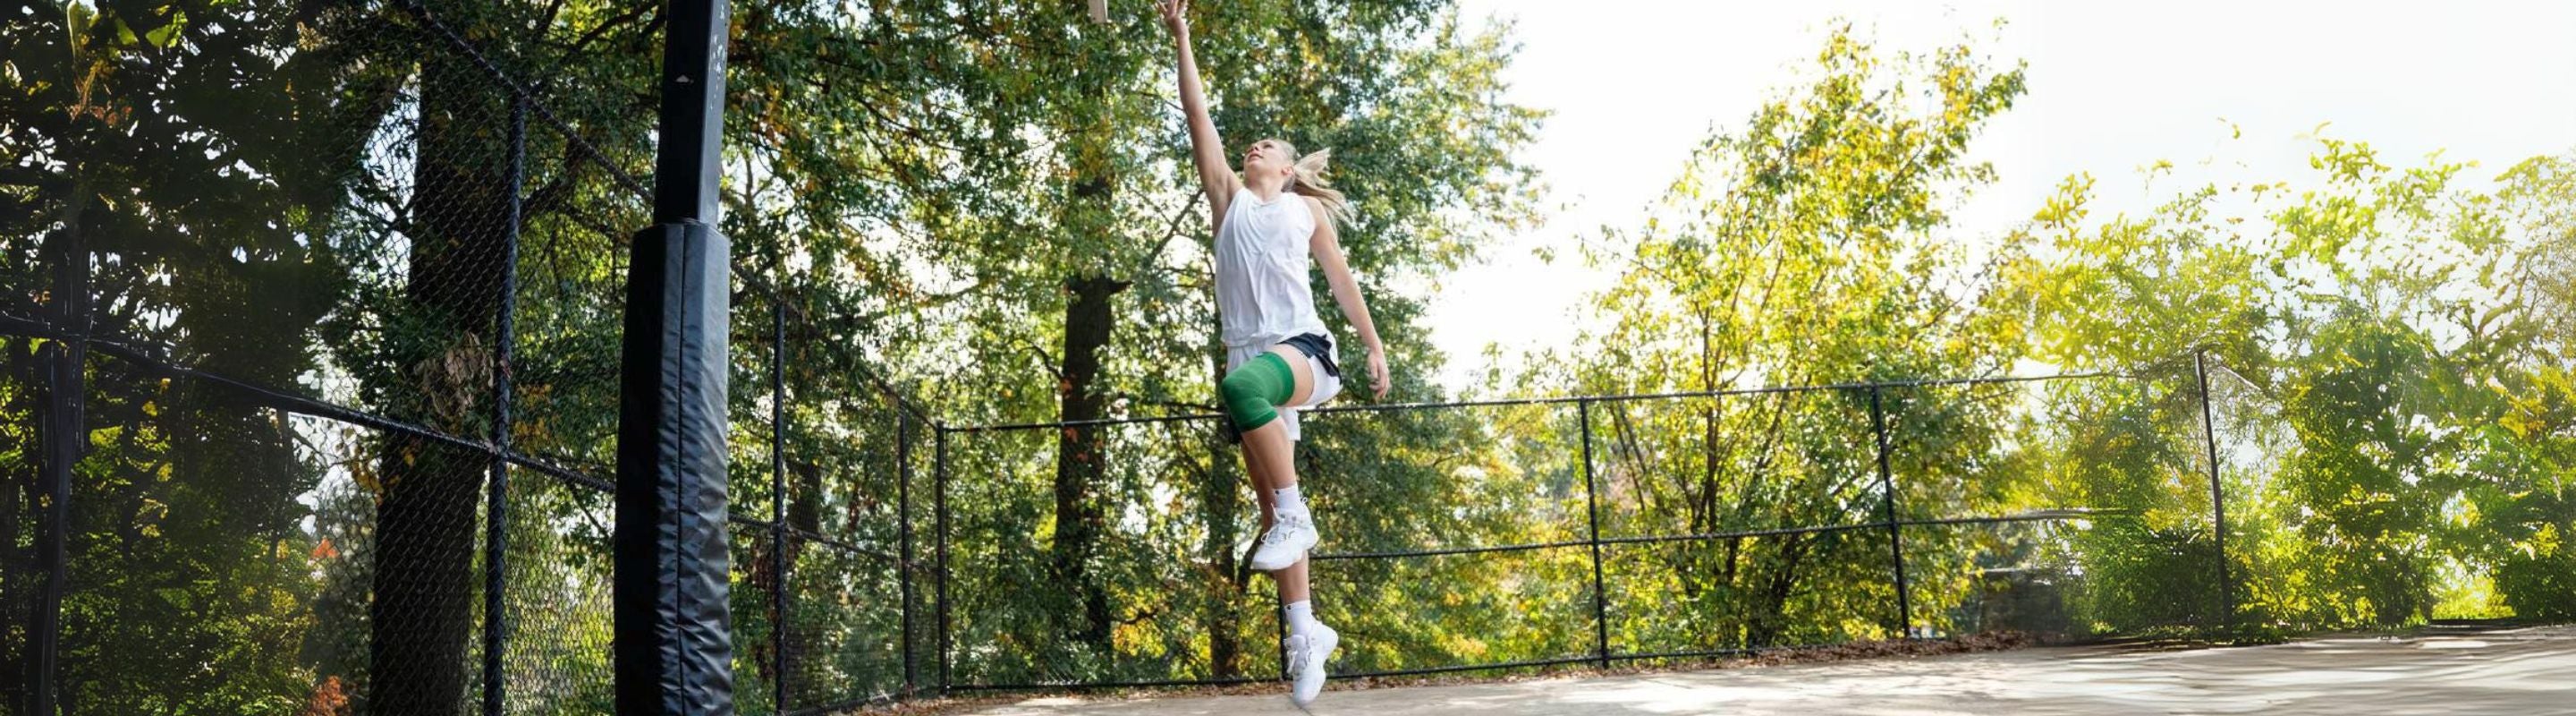 person in the middle of making a shot on an outdoor basketball court. She is wearing Bauerfeind's NBA Compression Knee Support and basketball shoes, essential basketball training gear